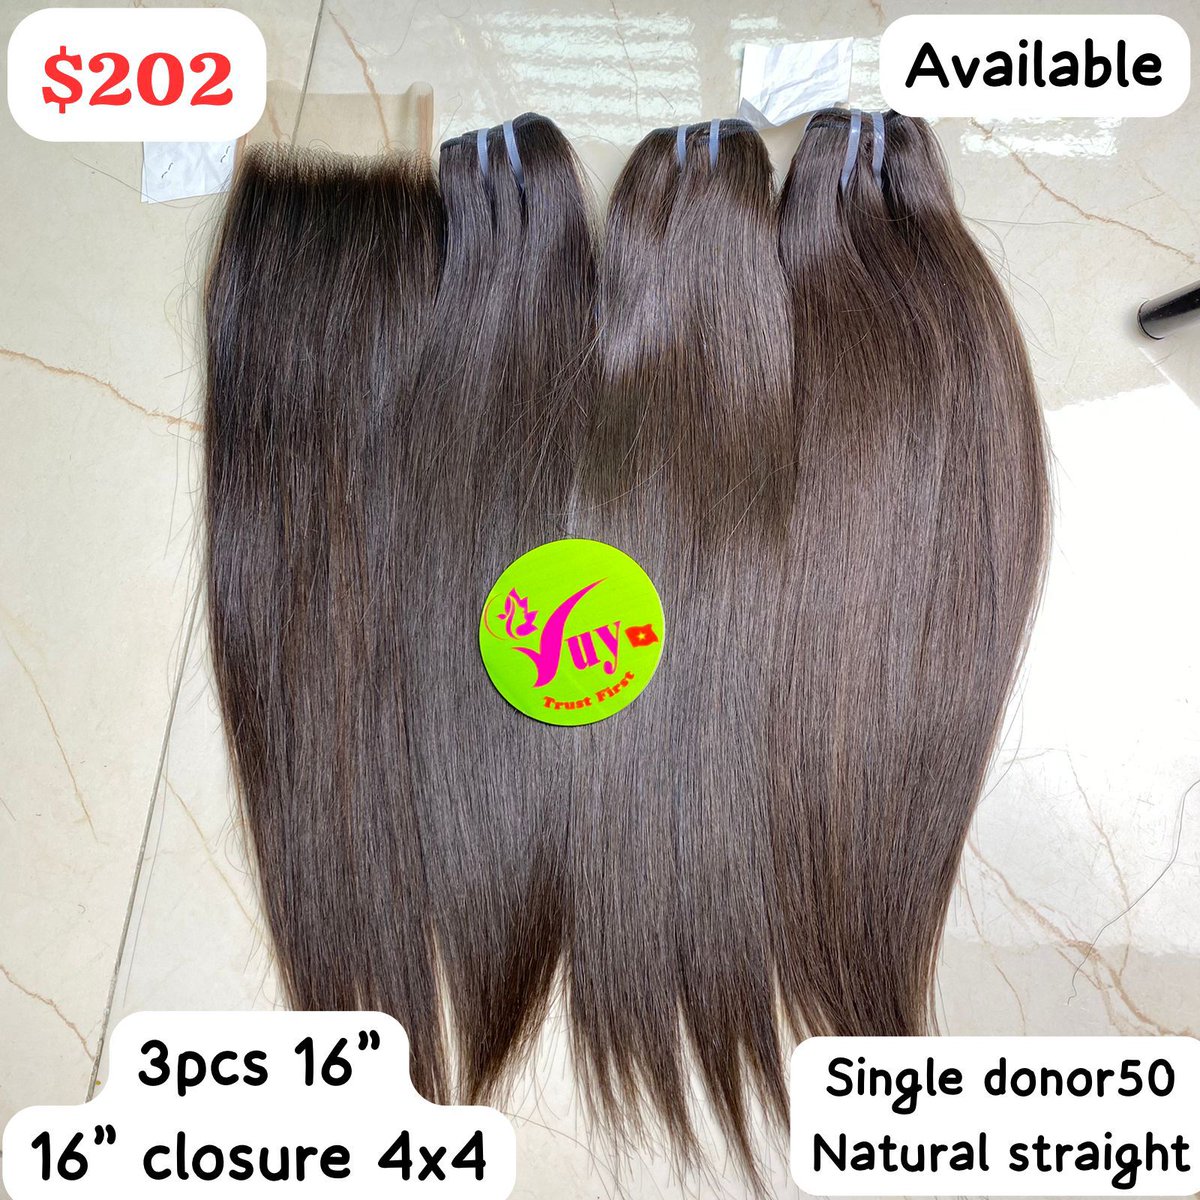 Set Single Donor Available Ready For Shipping 😍Contact with me on whatsapp +84396092128 #wholesale hair #wholesalehairvendors #wholesalehairsupplier #vuyvietnam #wholesalehairextension #hairsupplier #hairsupplierinvietnam #rawhair #rawhairvendor #hairfactory